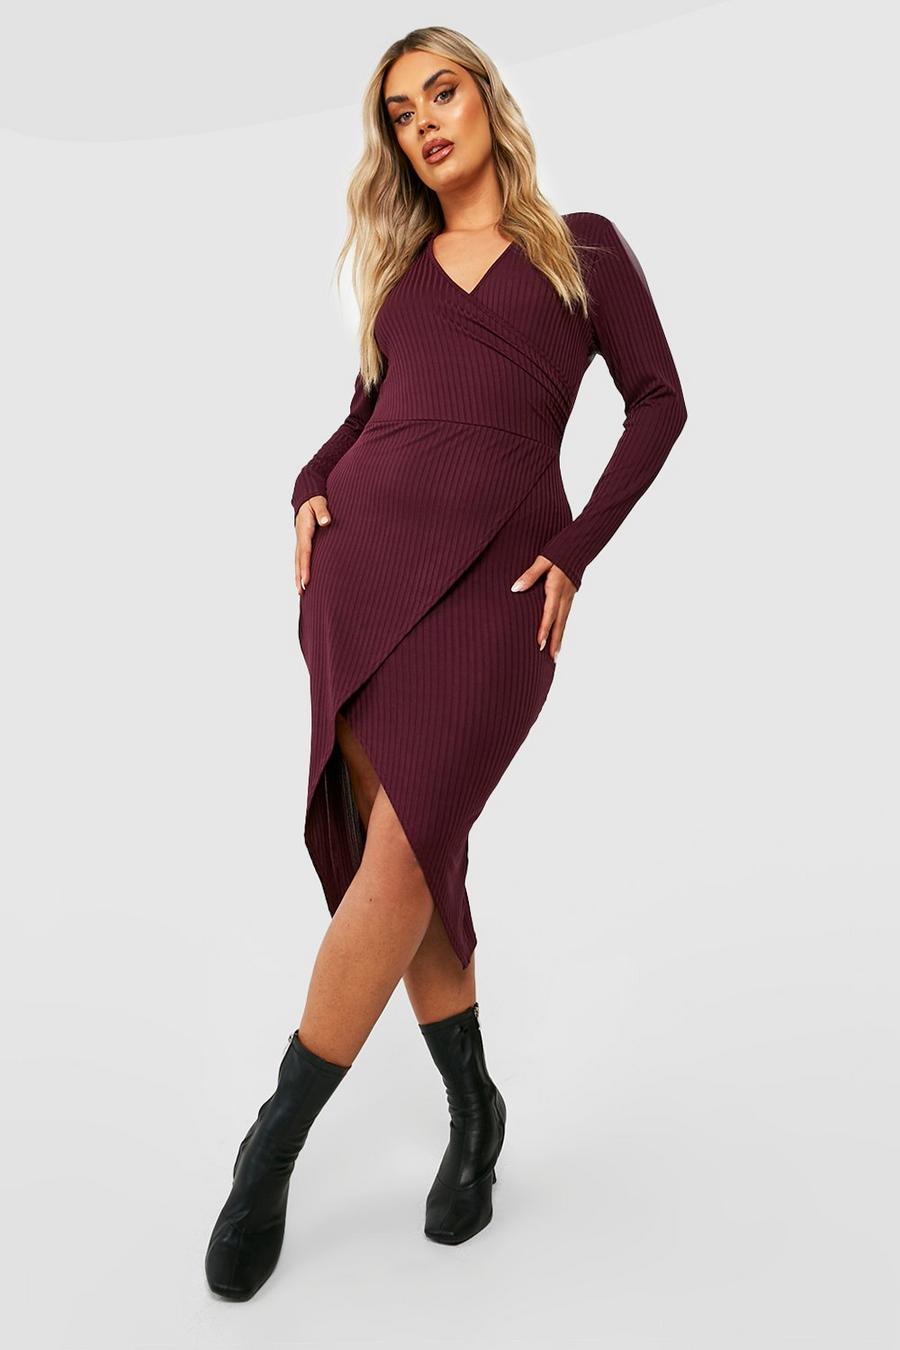 Grande taille - Robe portefeuille côtelée, Berry red